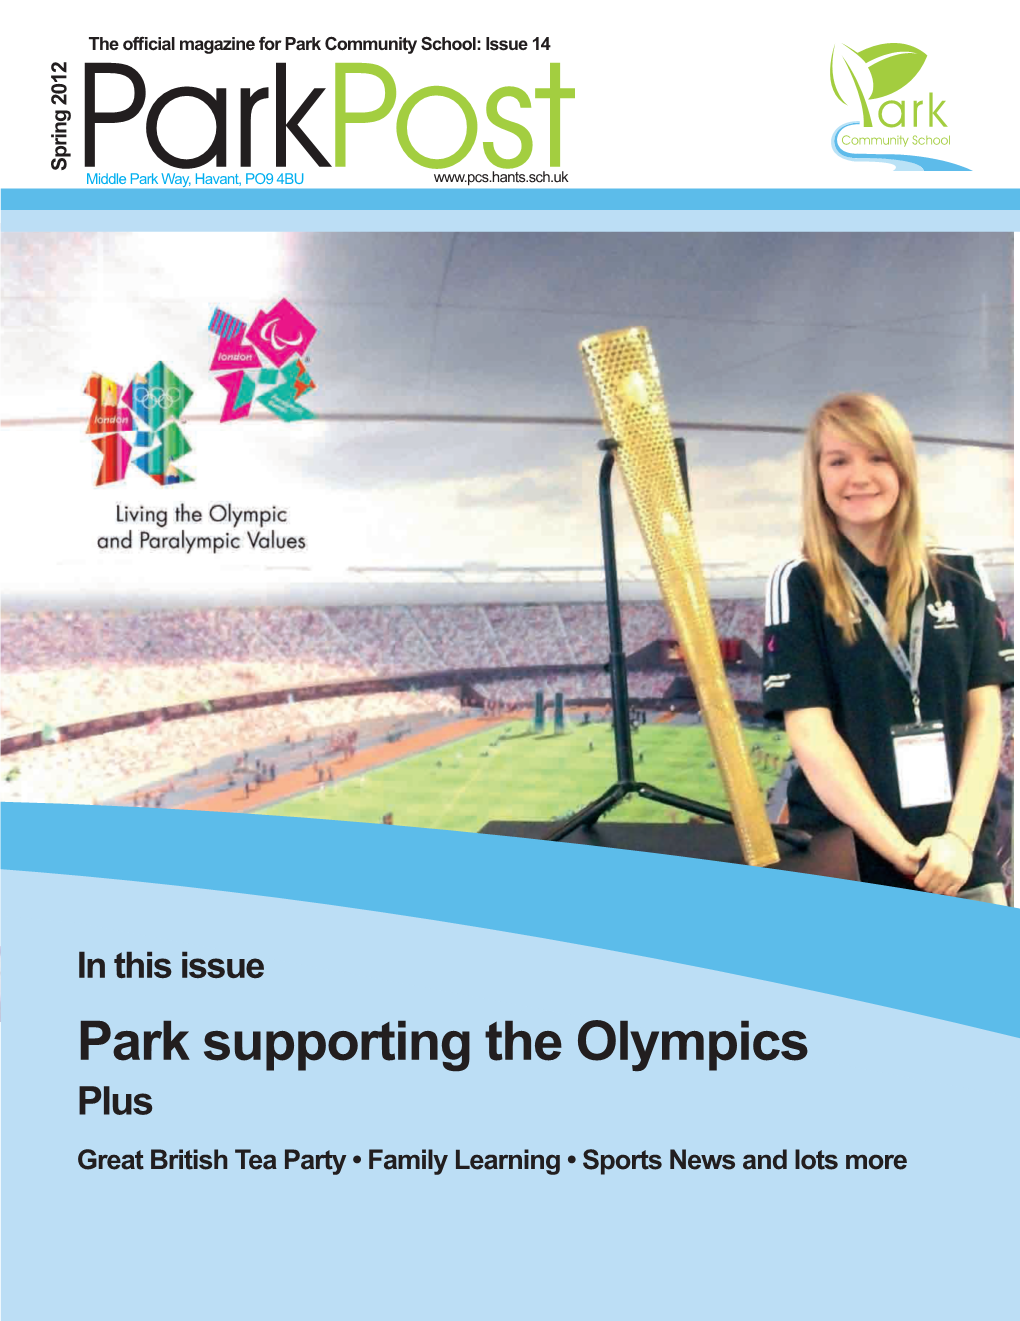 Park Supporting the Olympics